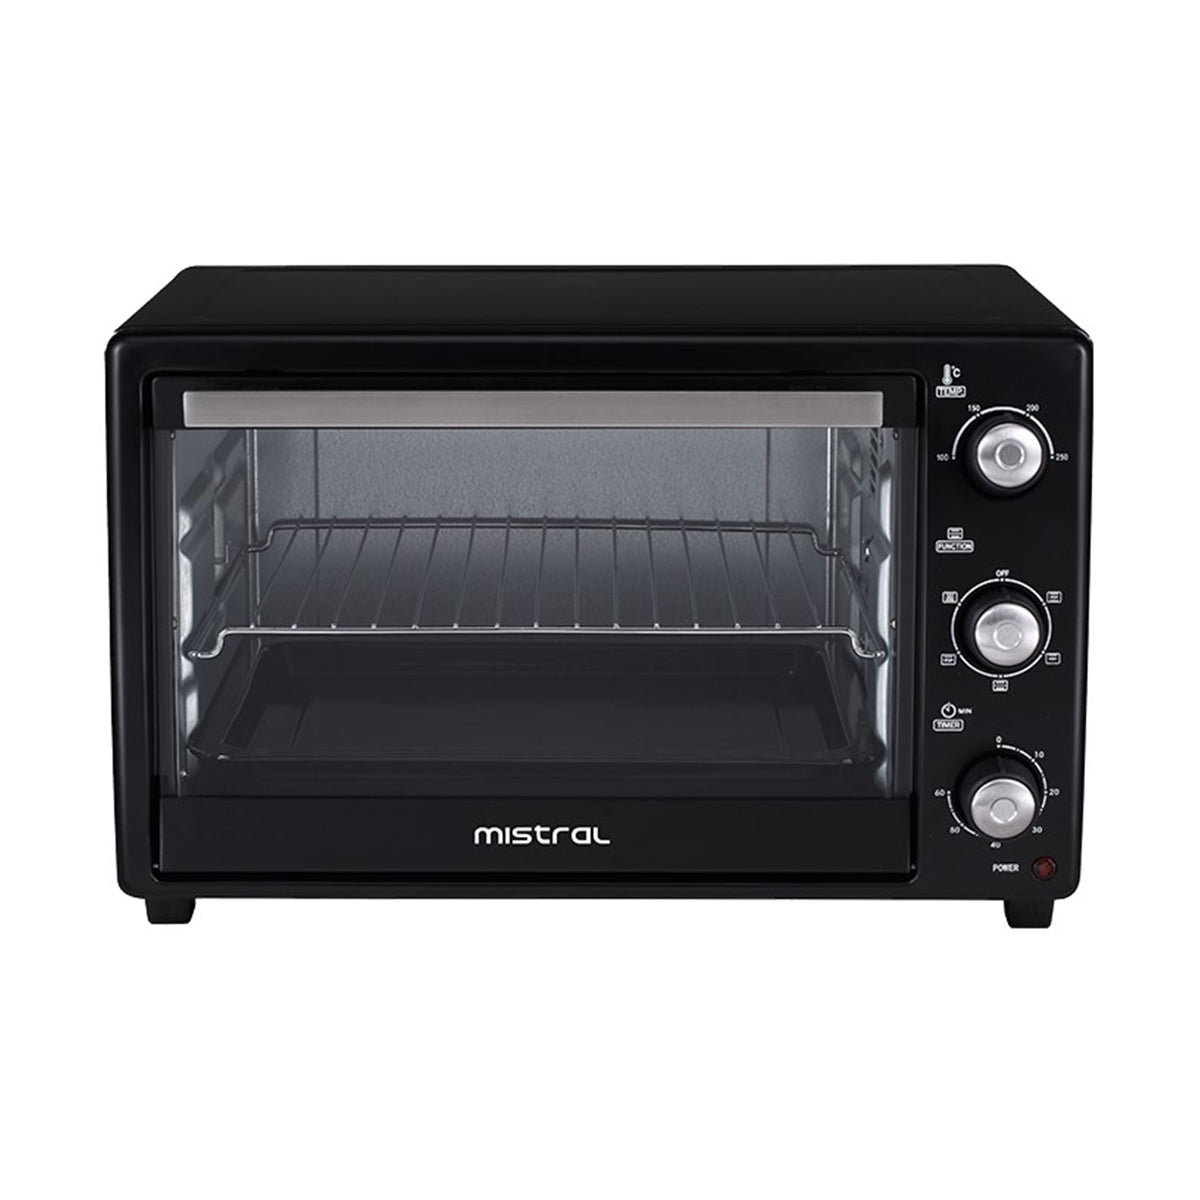 Mistral Electric Oven 32L